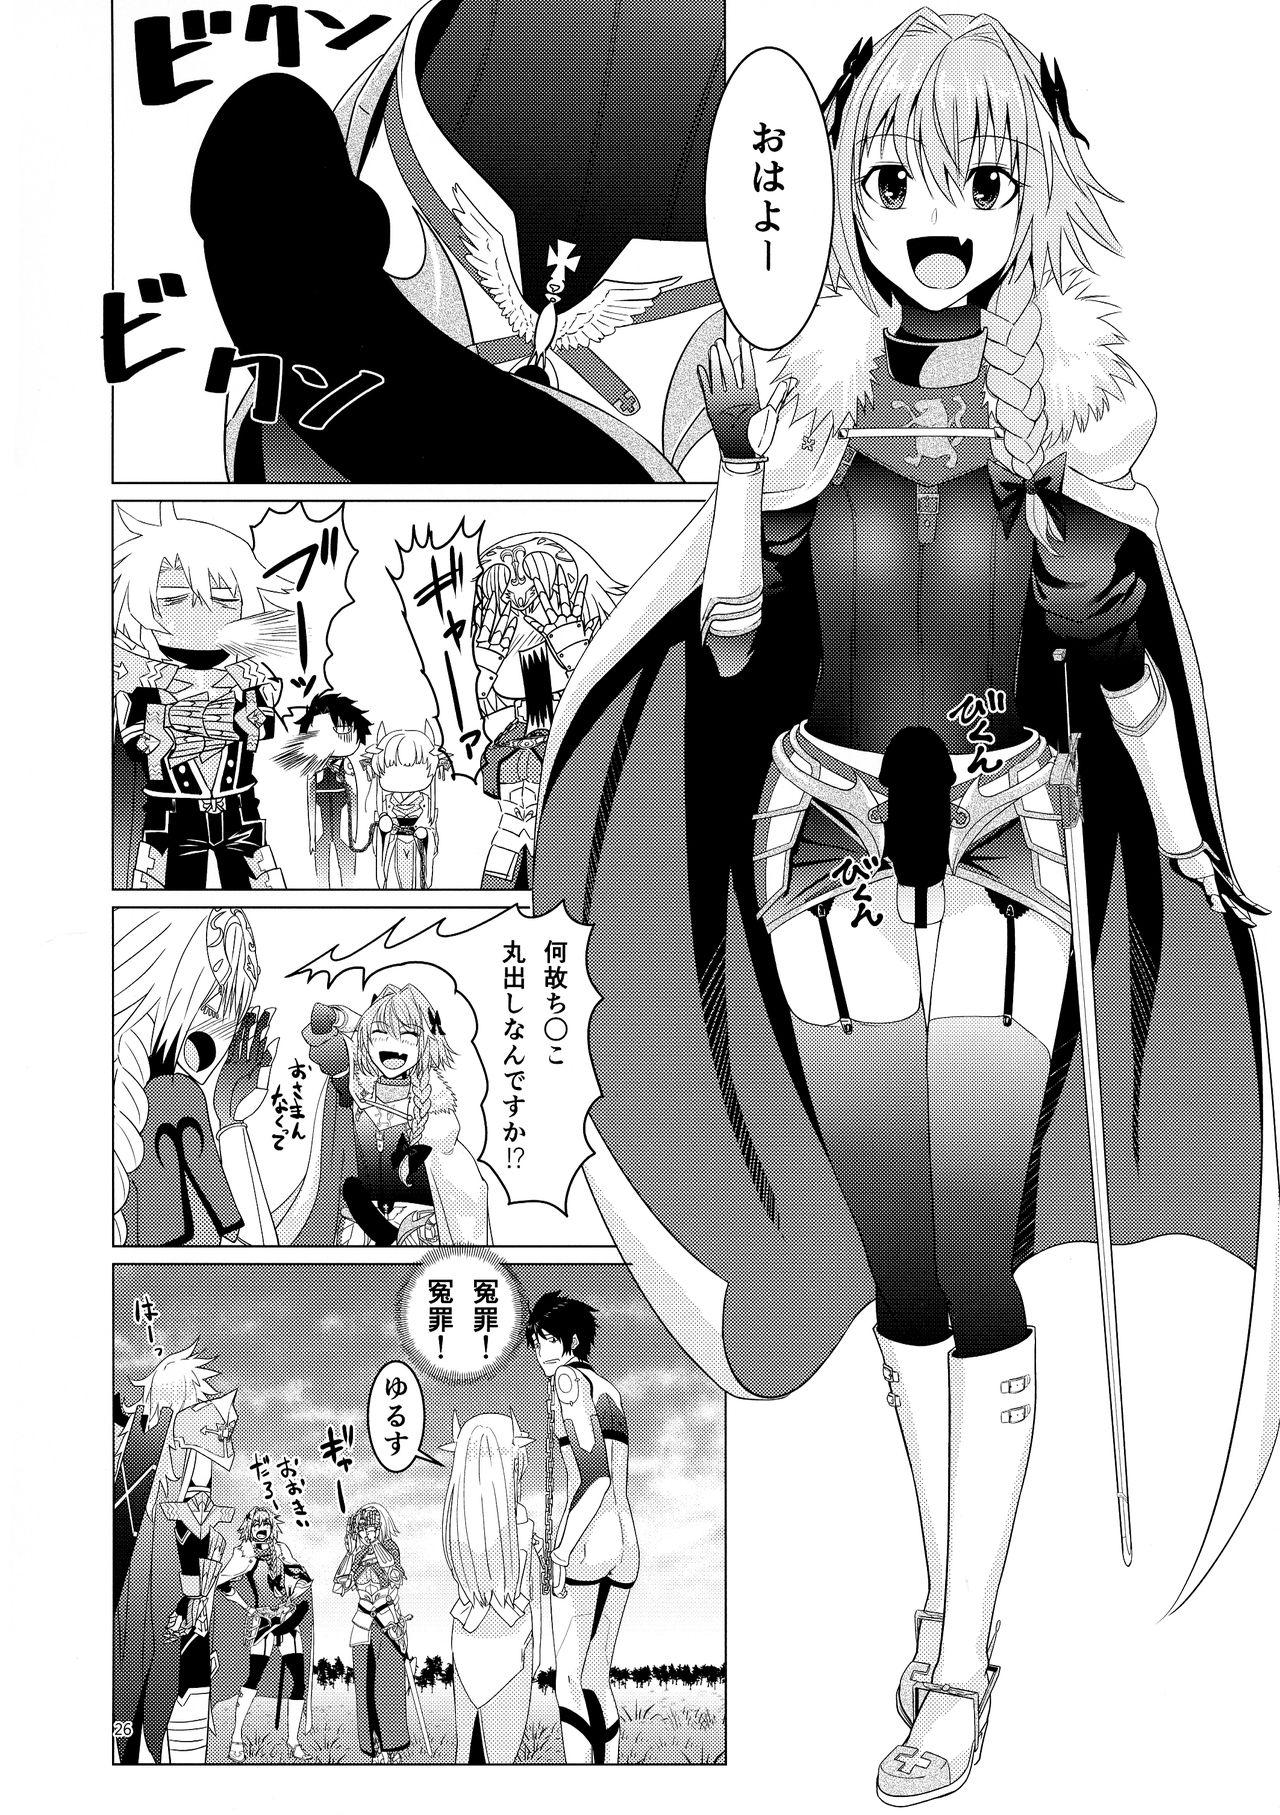 Matching Spirits - Jeanne and Astolfo have sex 22